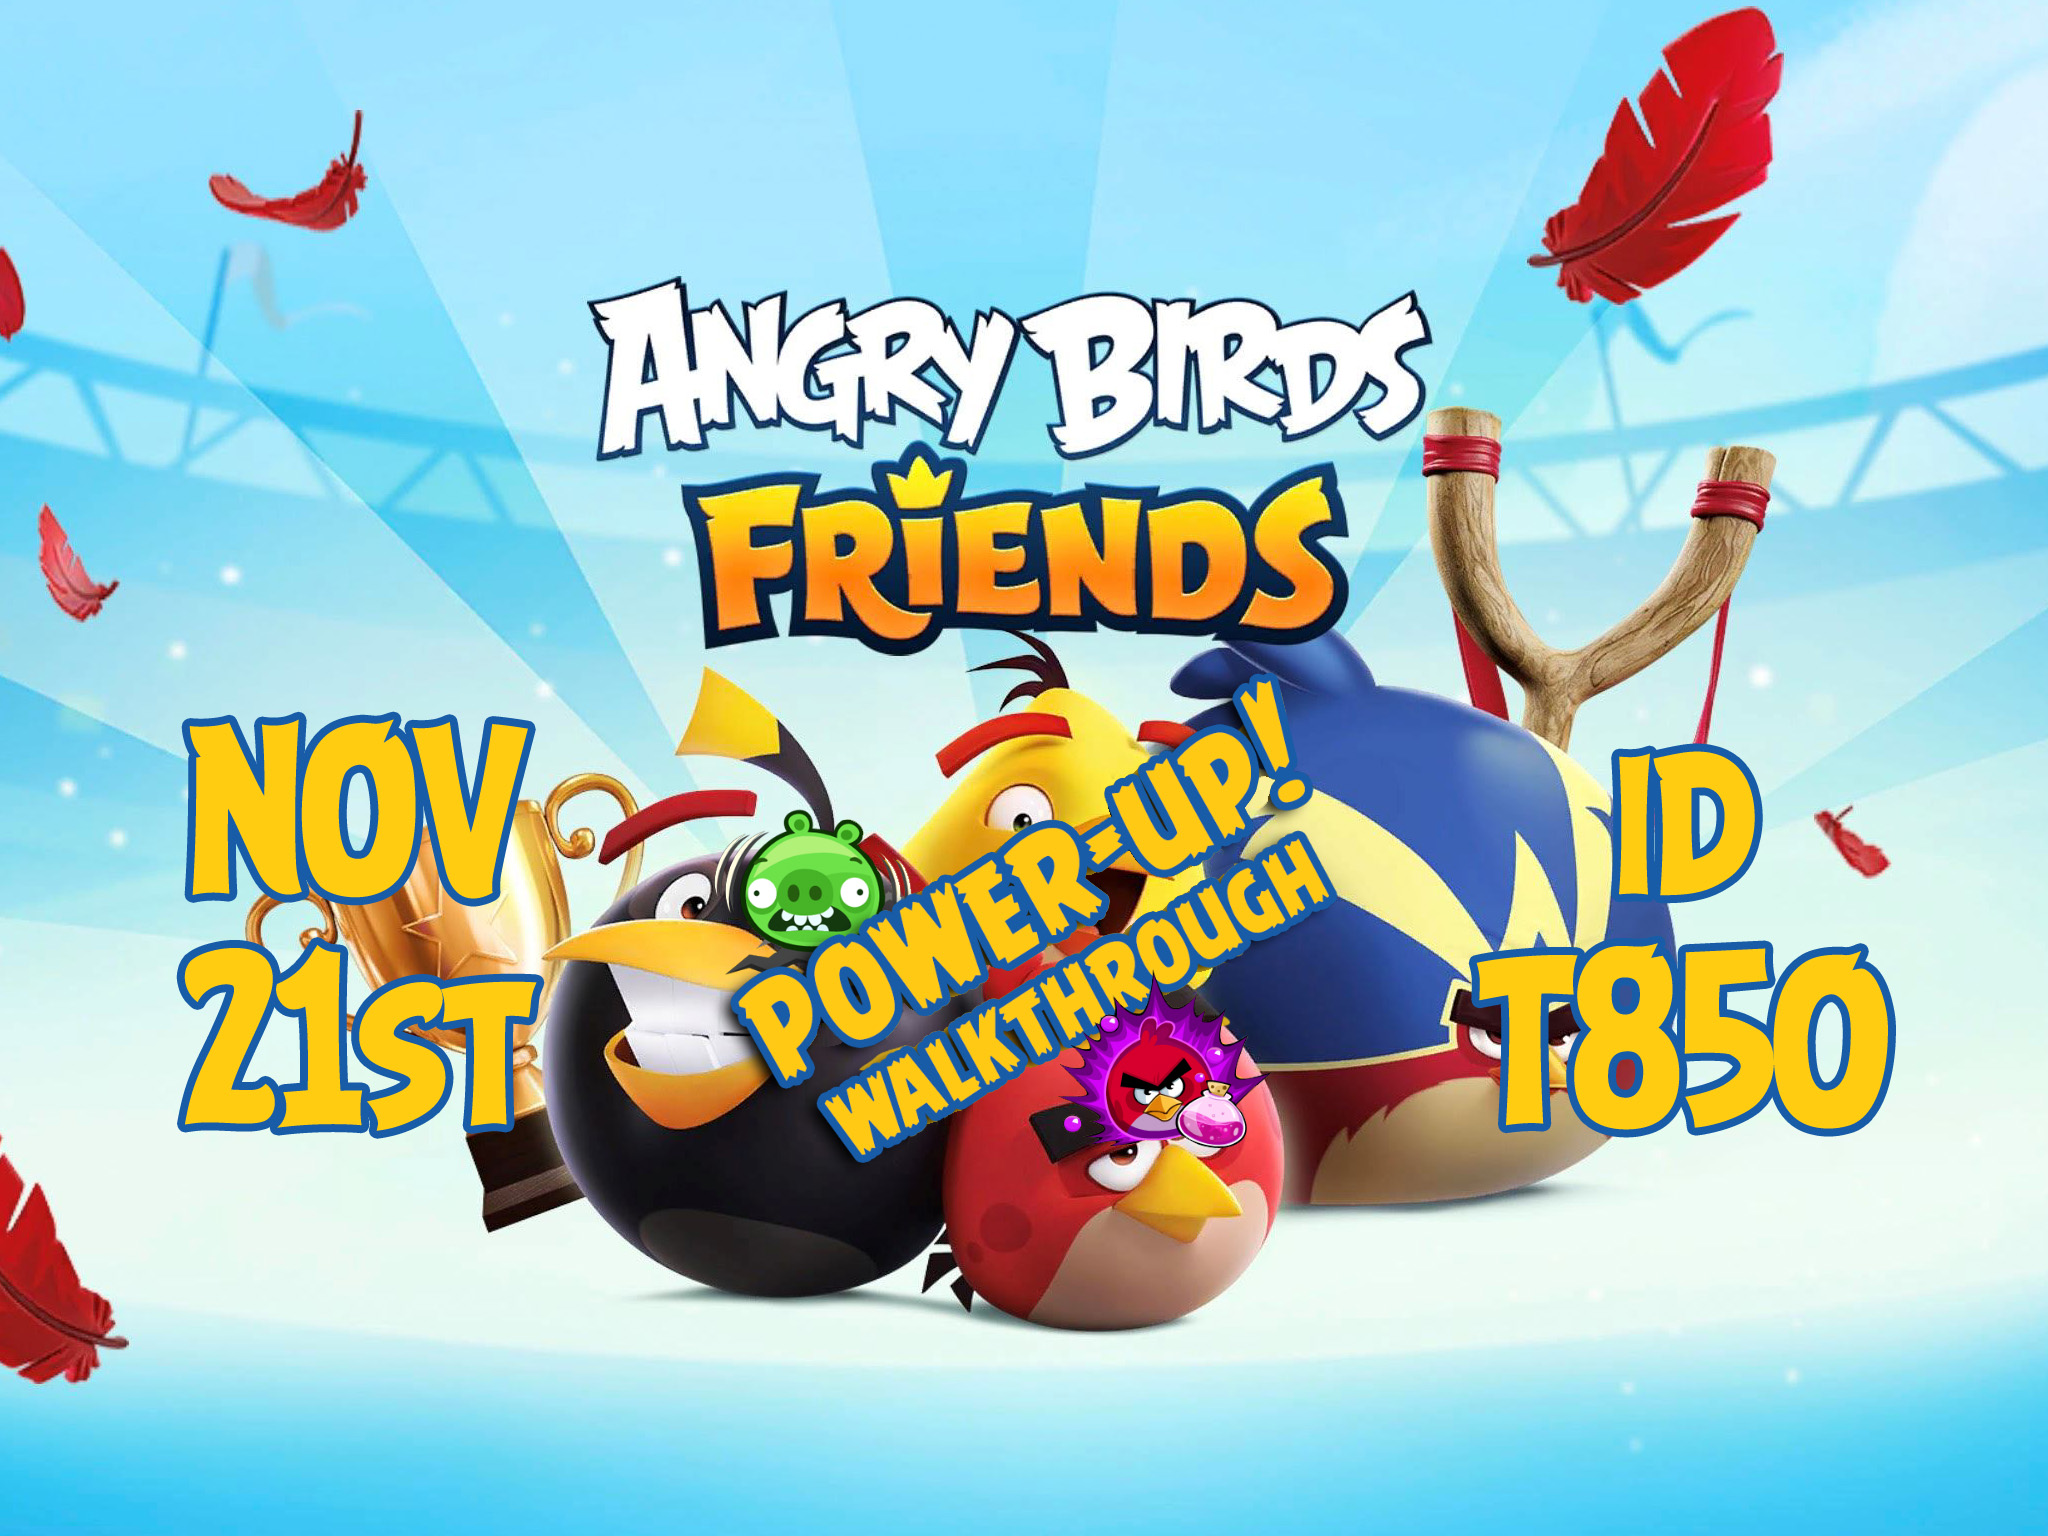 Angry-Birds-Friends-Tournament-T850-Feature-Image-PU